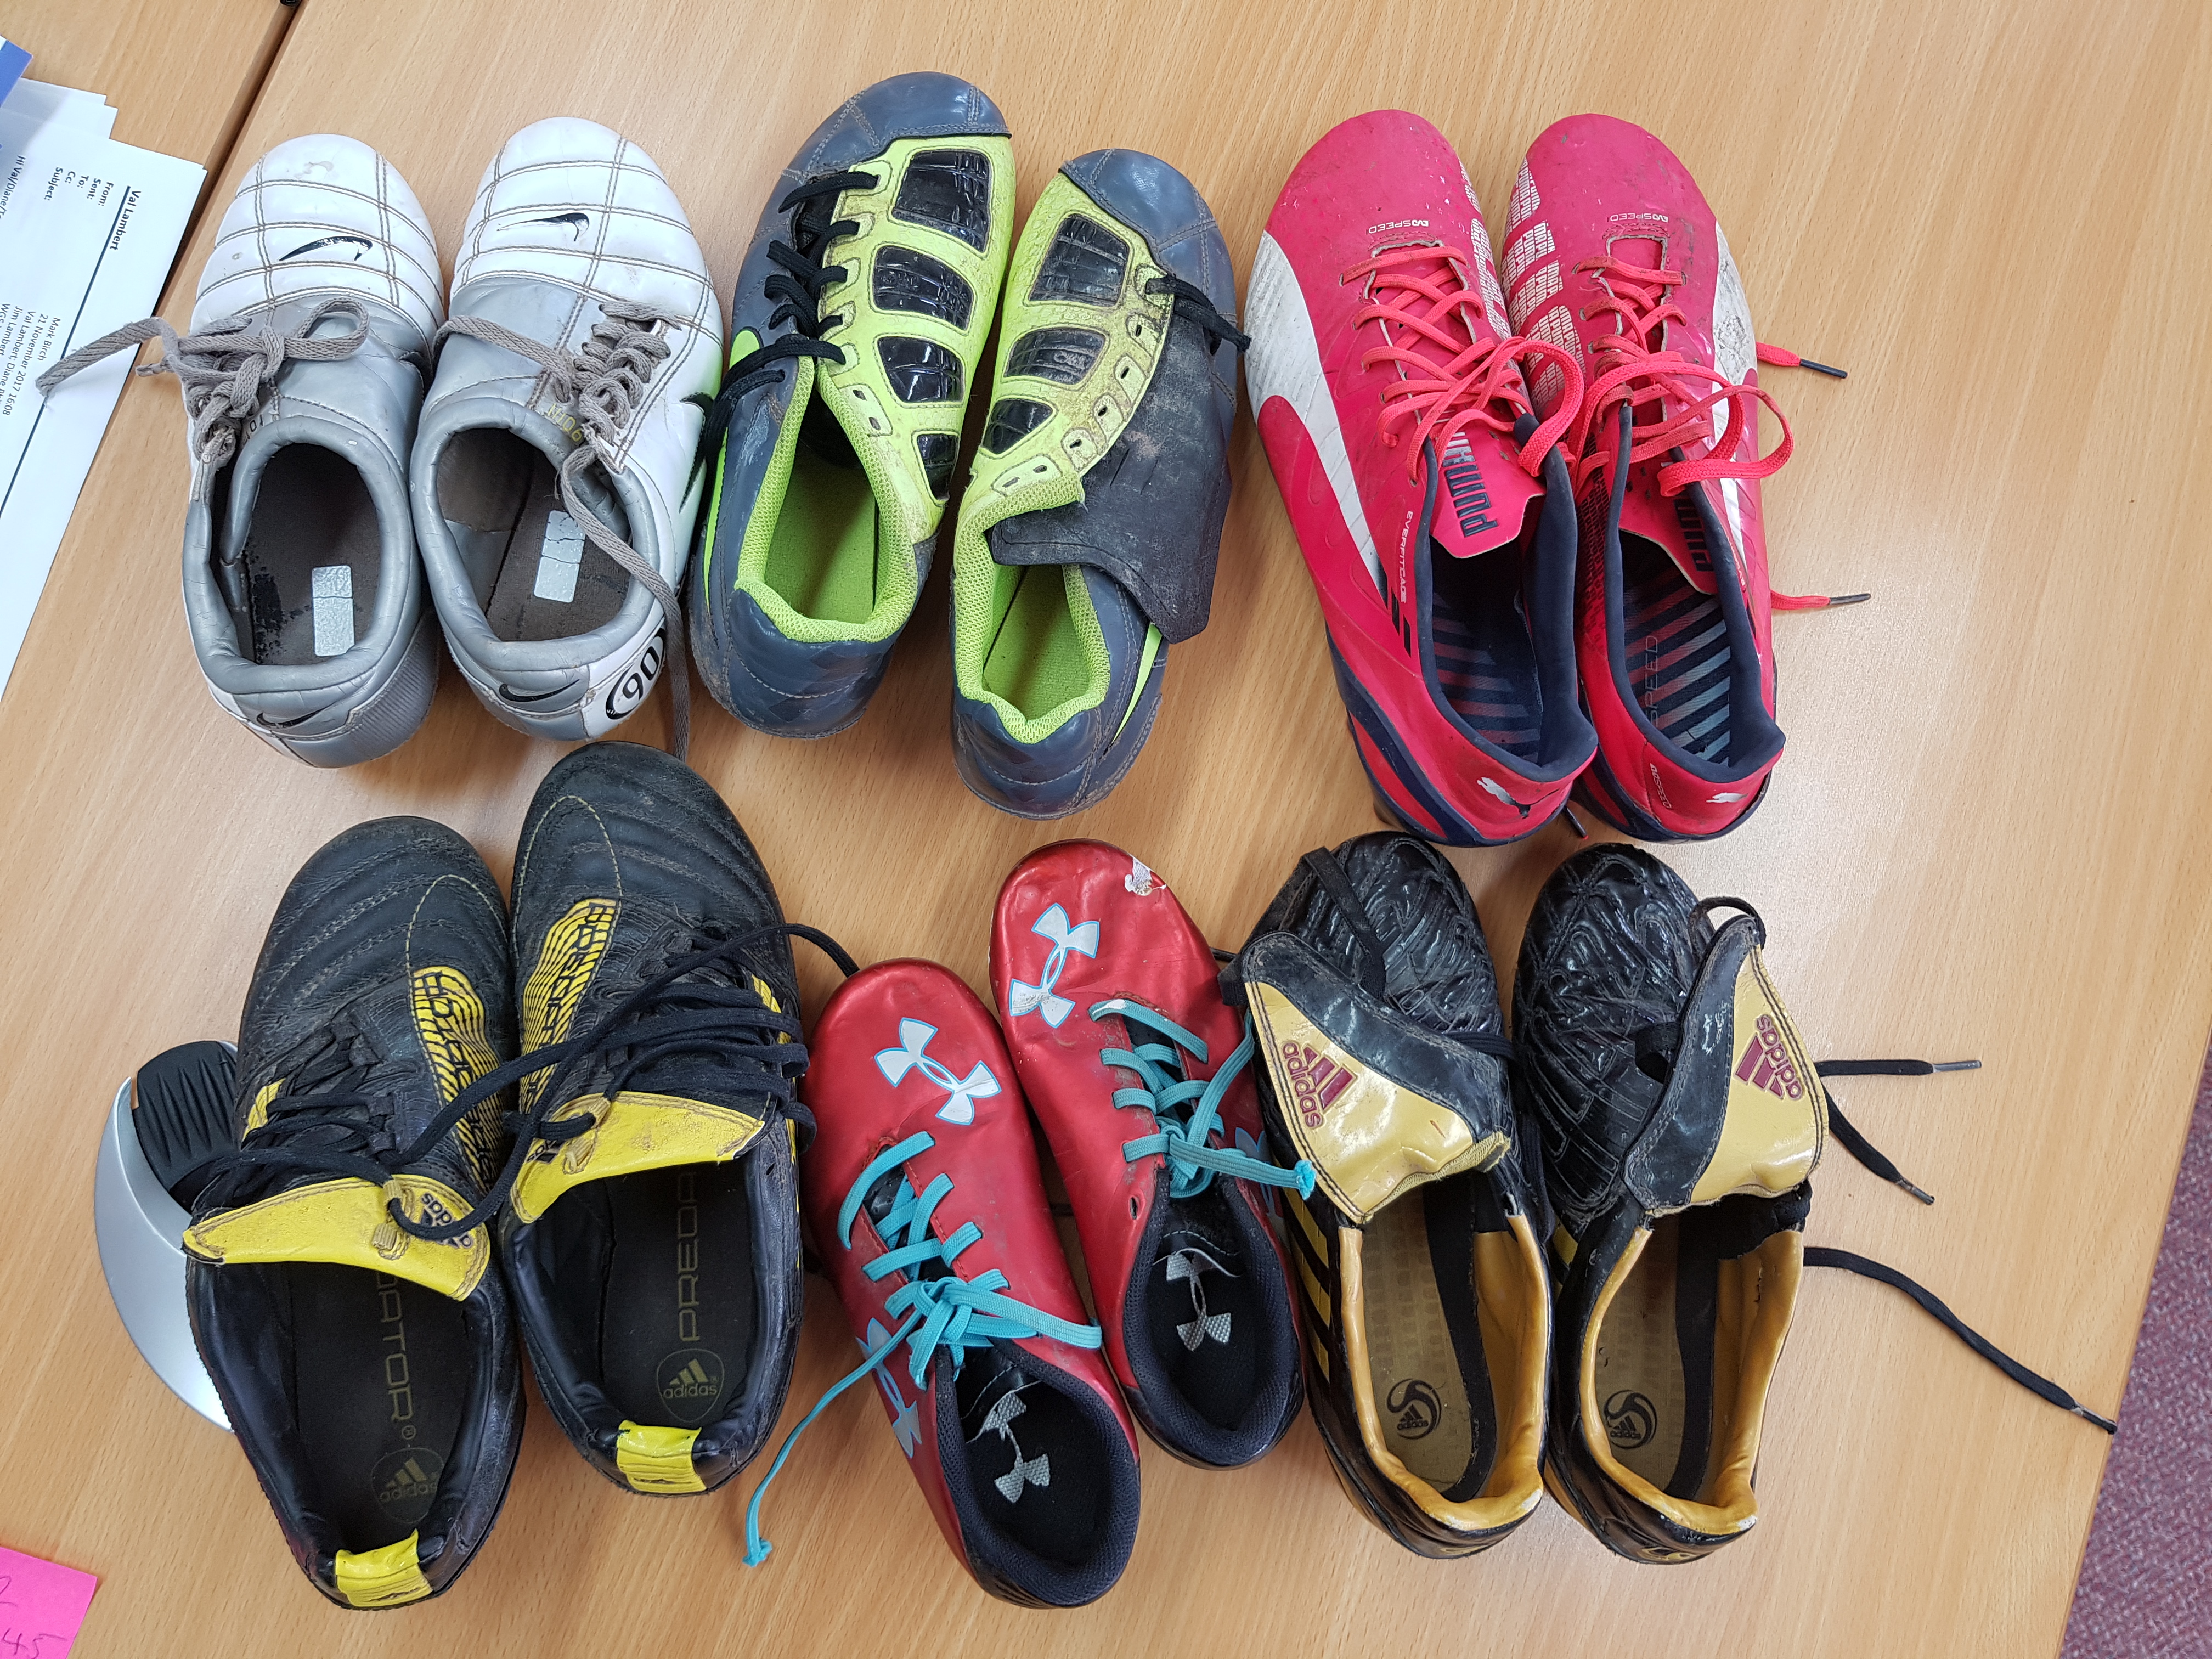 We want your old football boots - Herefordshire FA